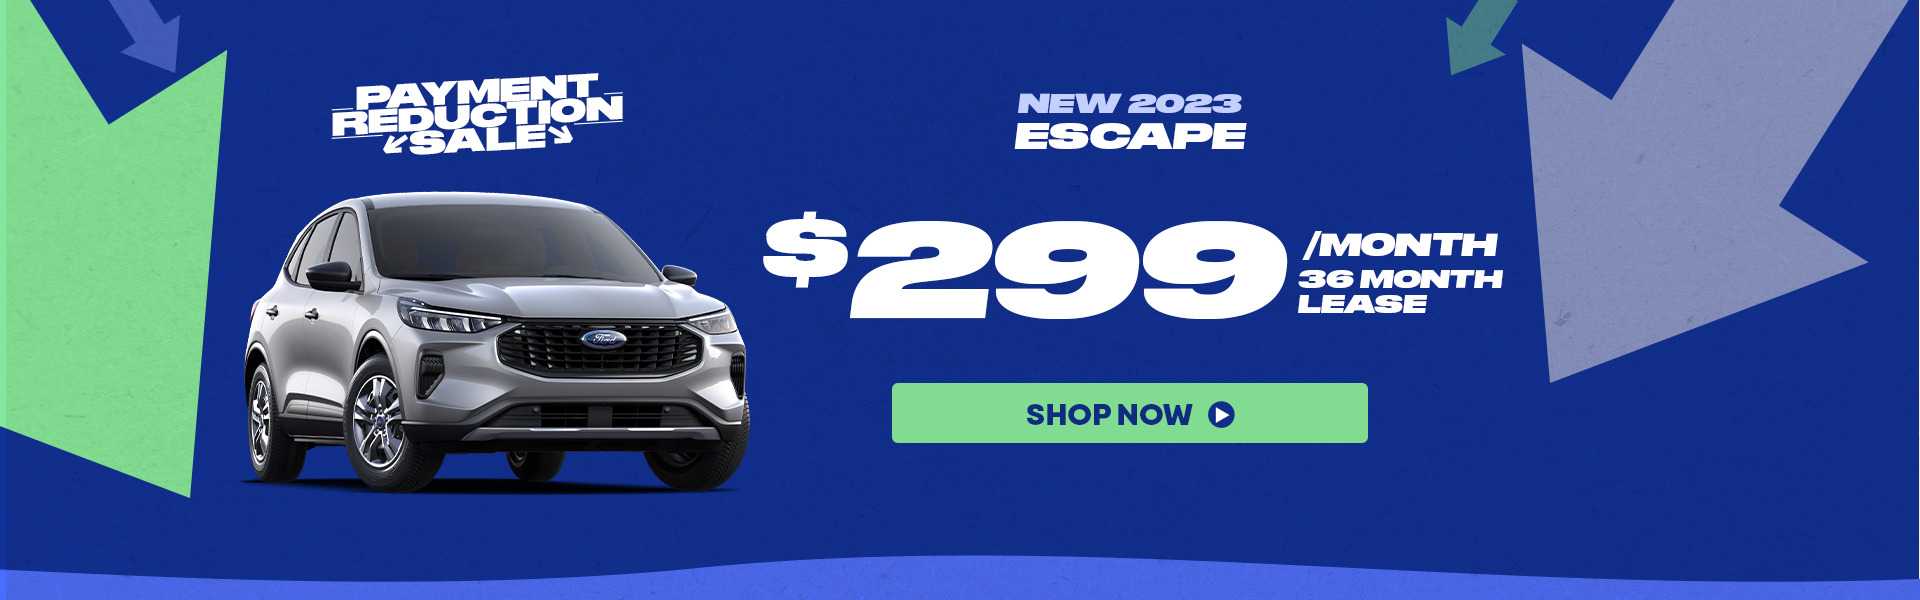 New Ford Escape Specials Near Me in Rosenberg, TX